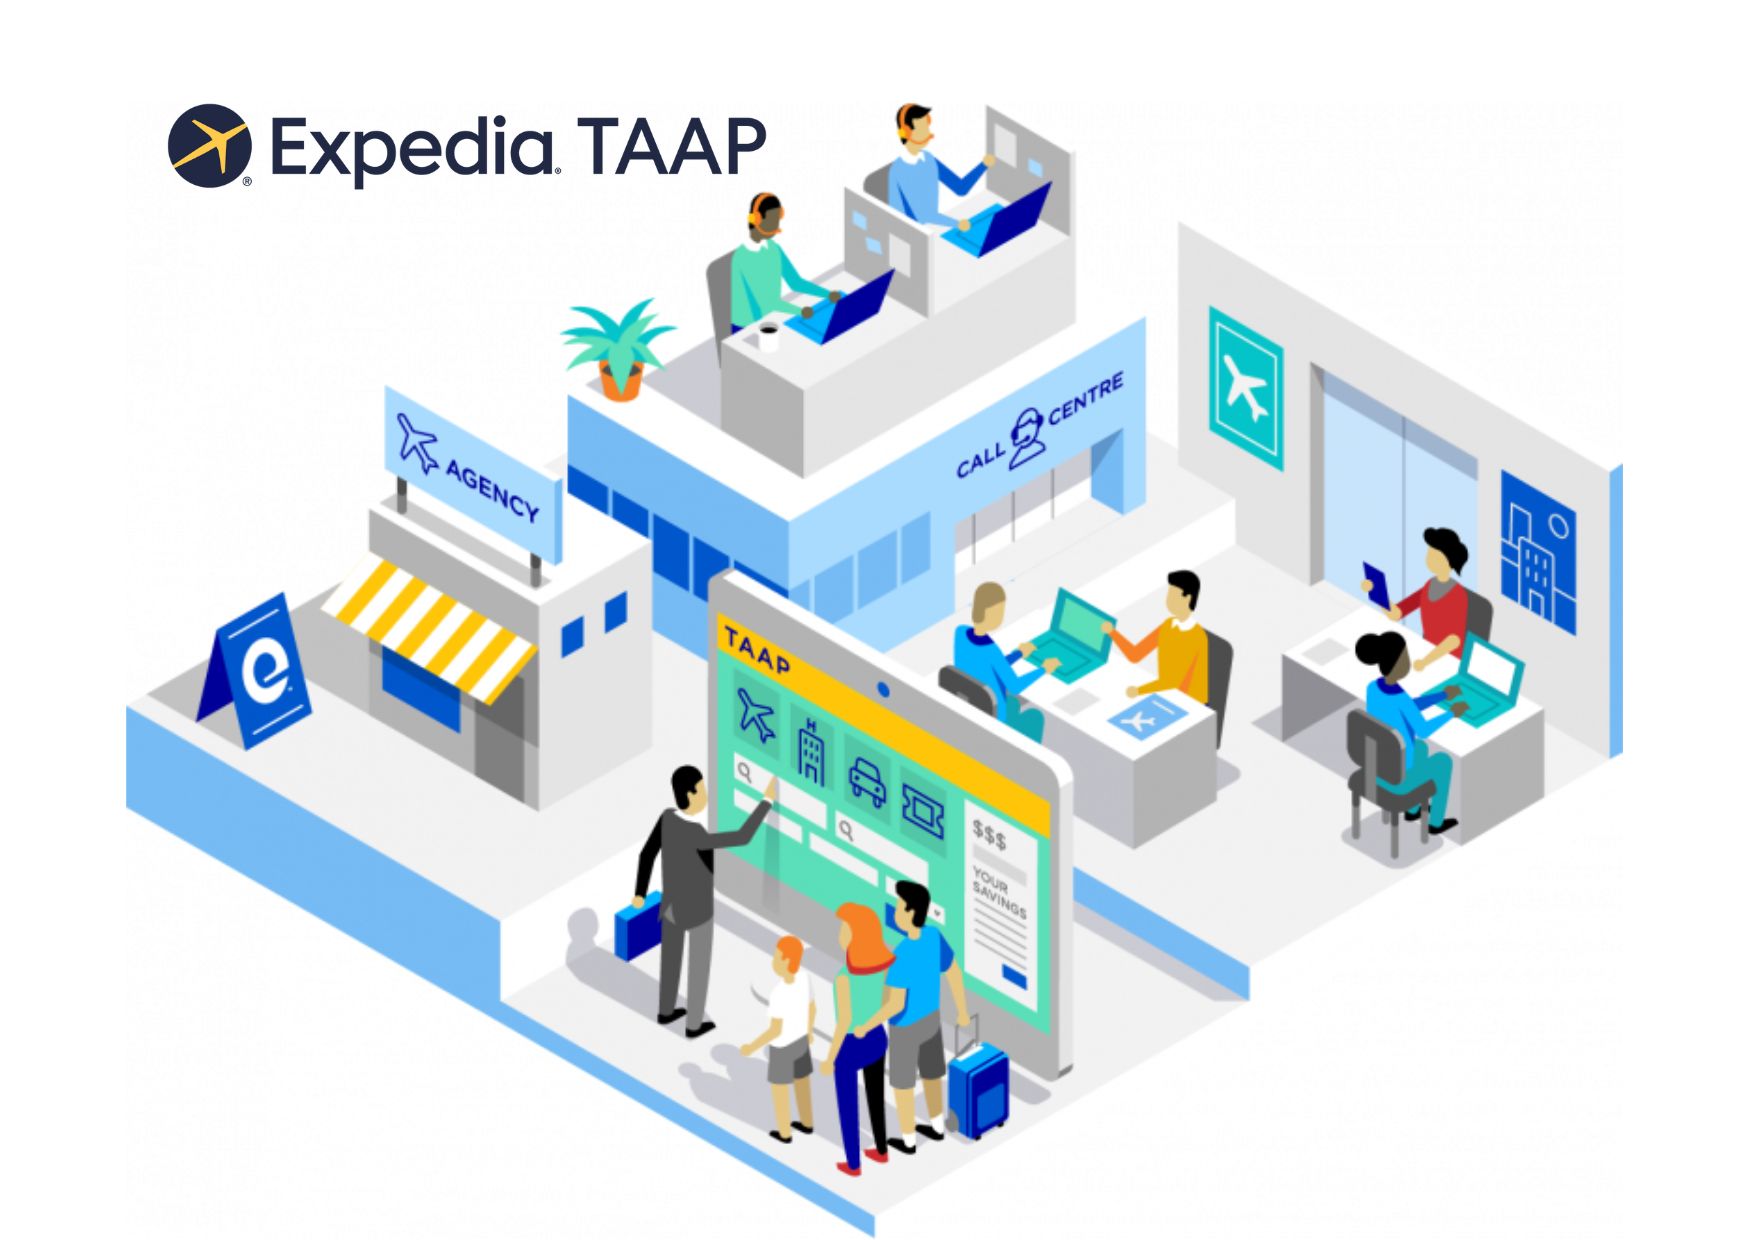 Expedia Group unveils enhanced, expanded features for TAAP Travel Advisors